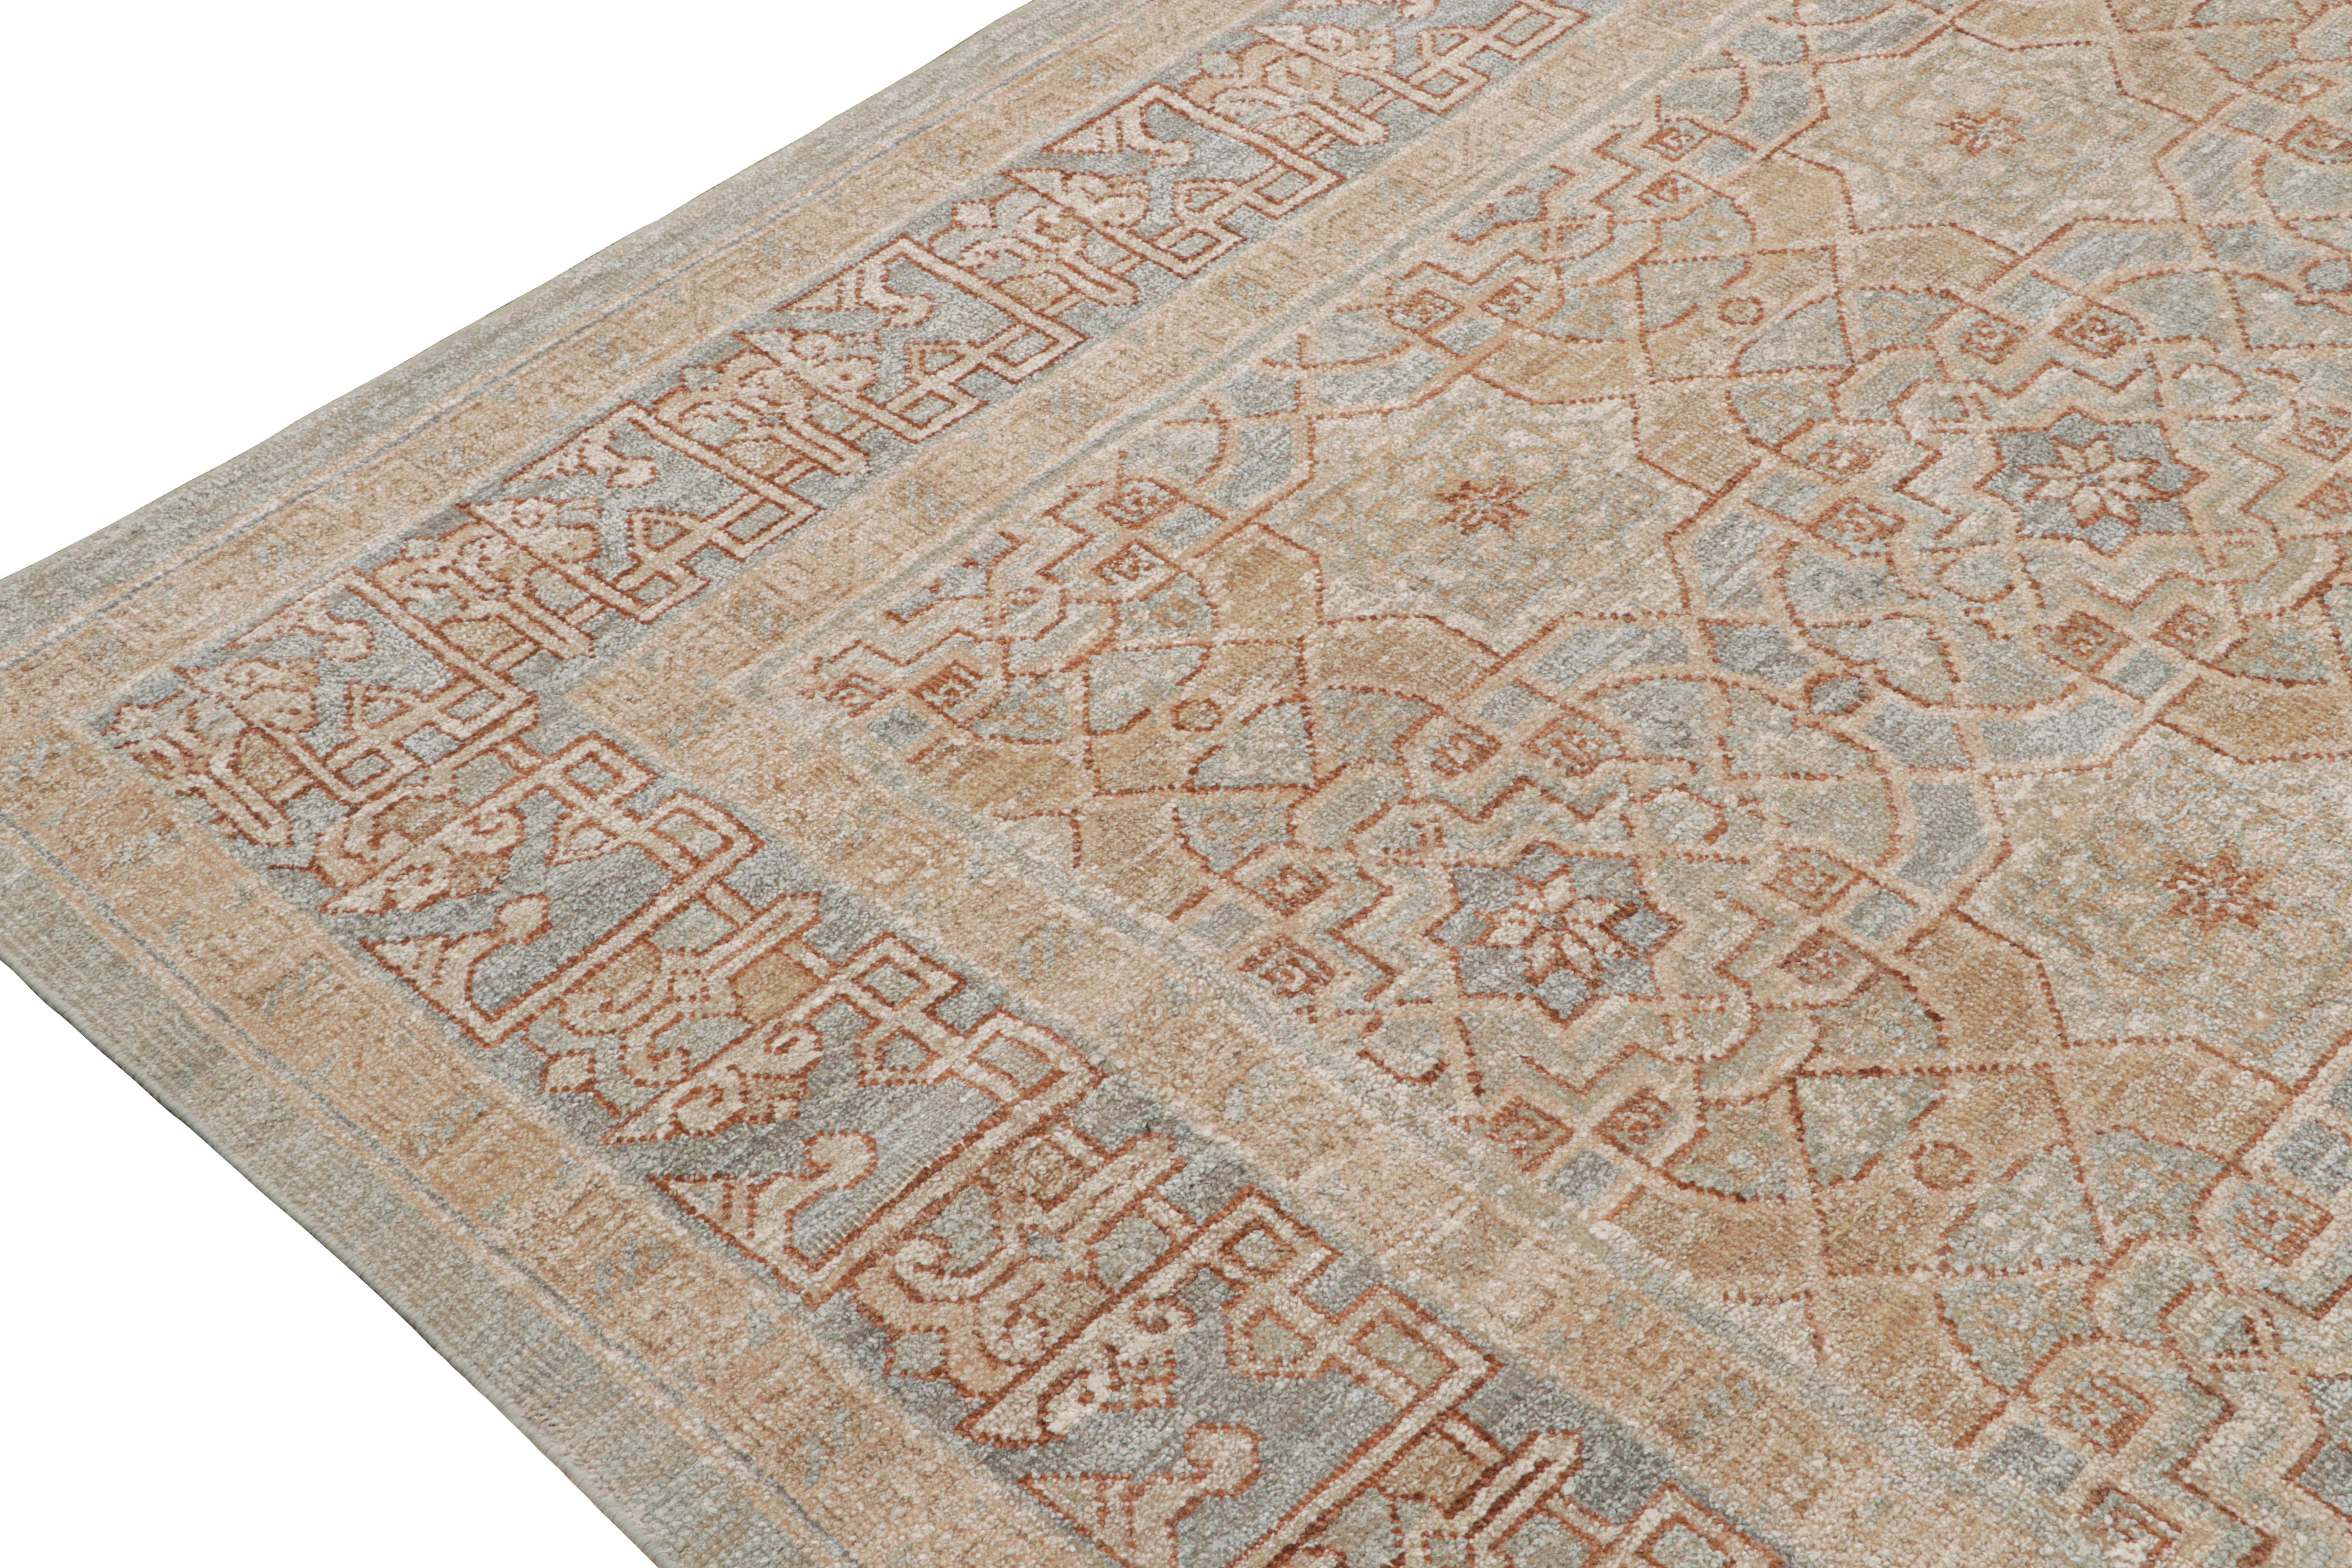 Rug & Kilim’s Oushak Style Rug in Beige-Brown & Blue Geometric Patterns In New Condition For Sale In Long Island City, NY